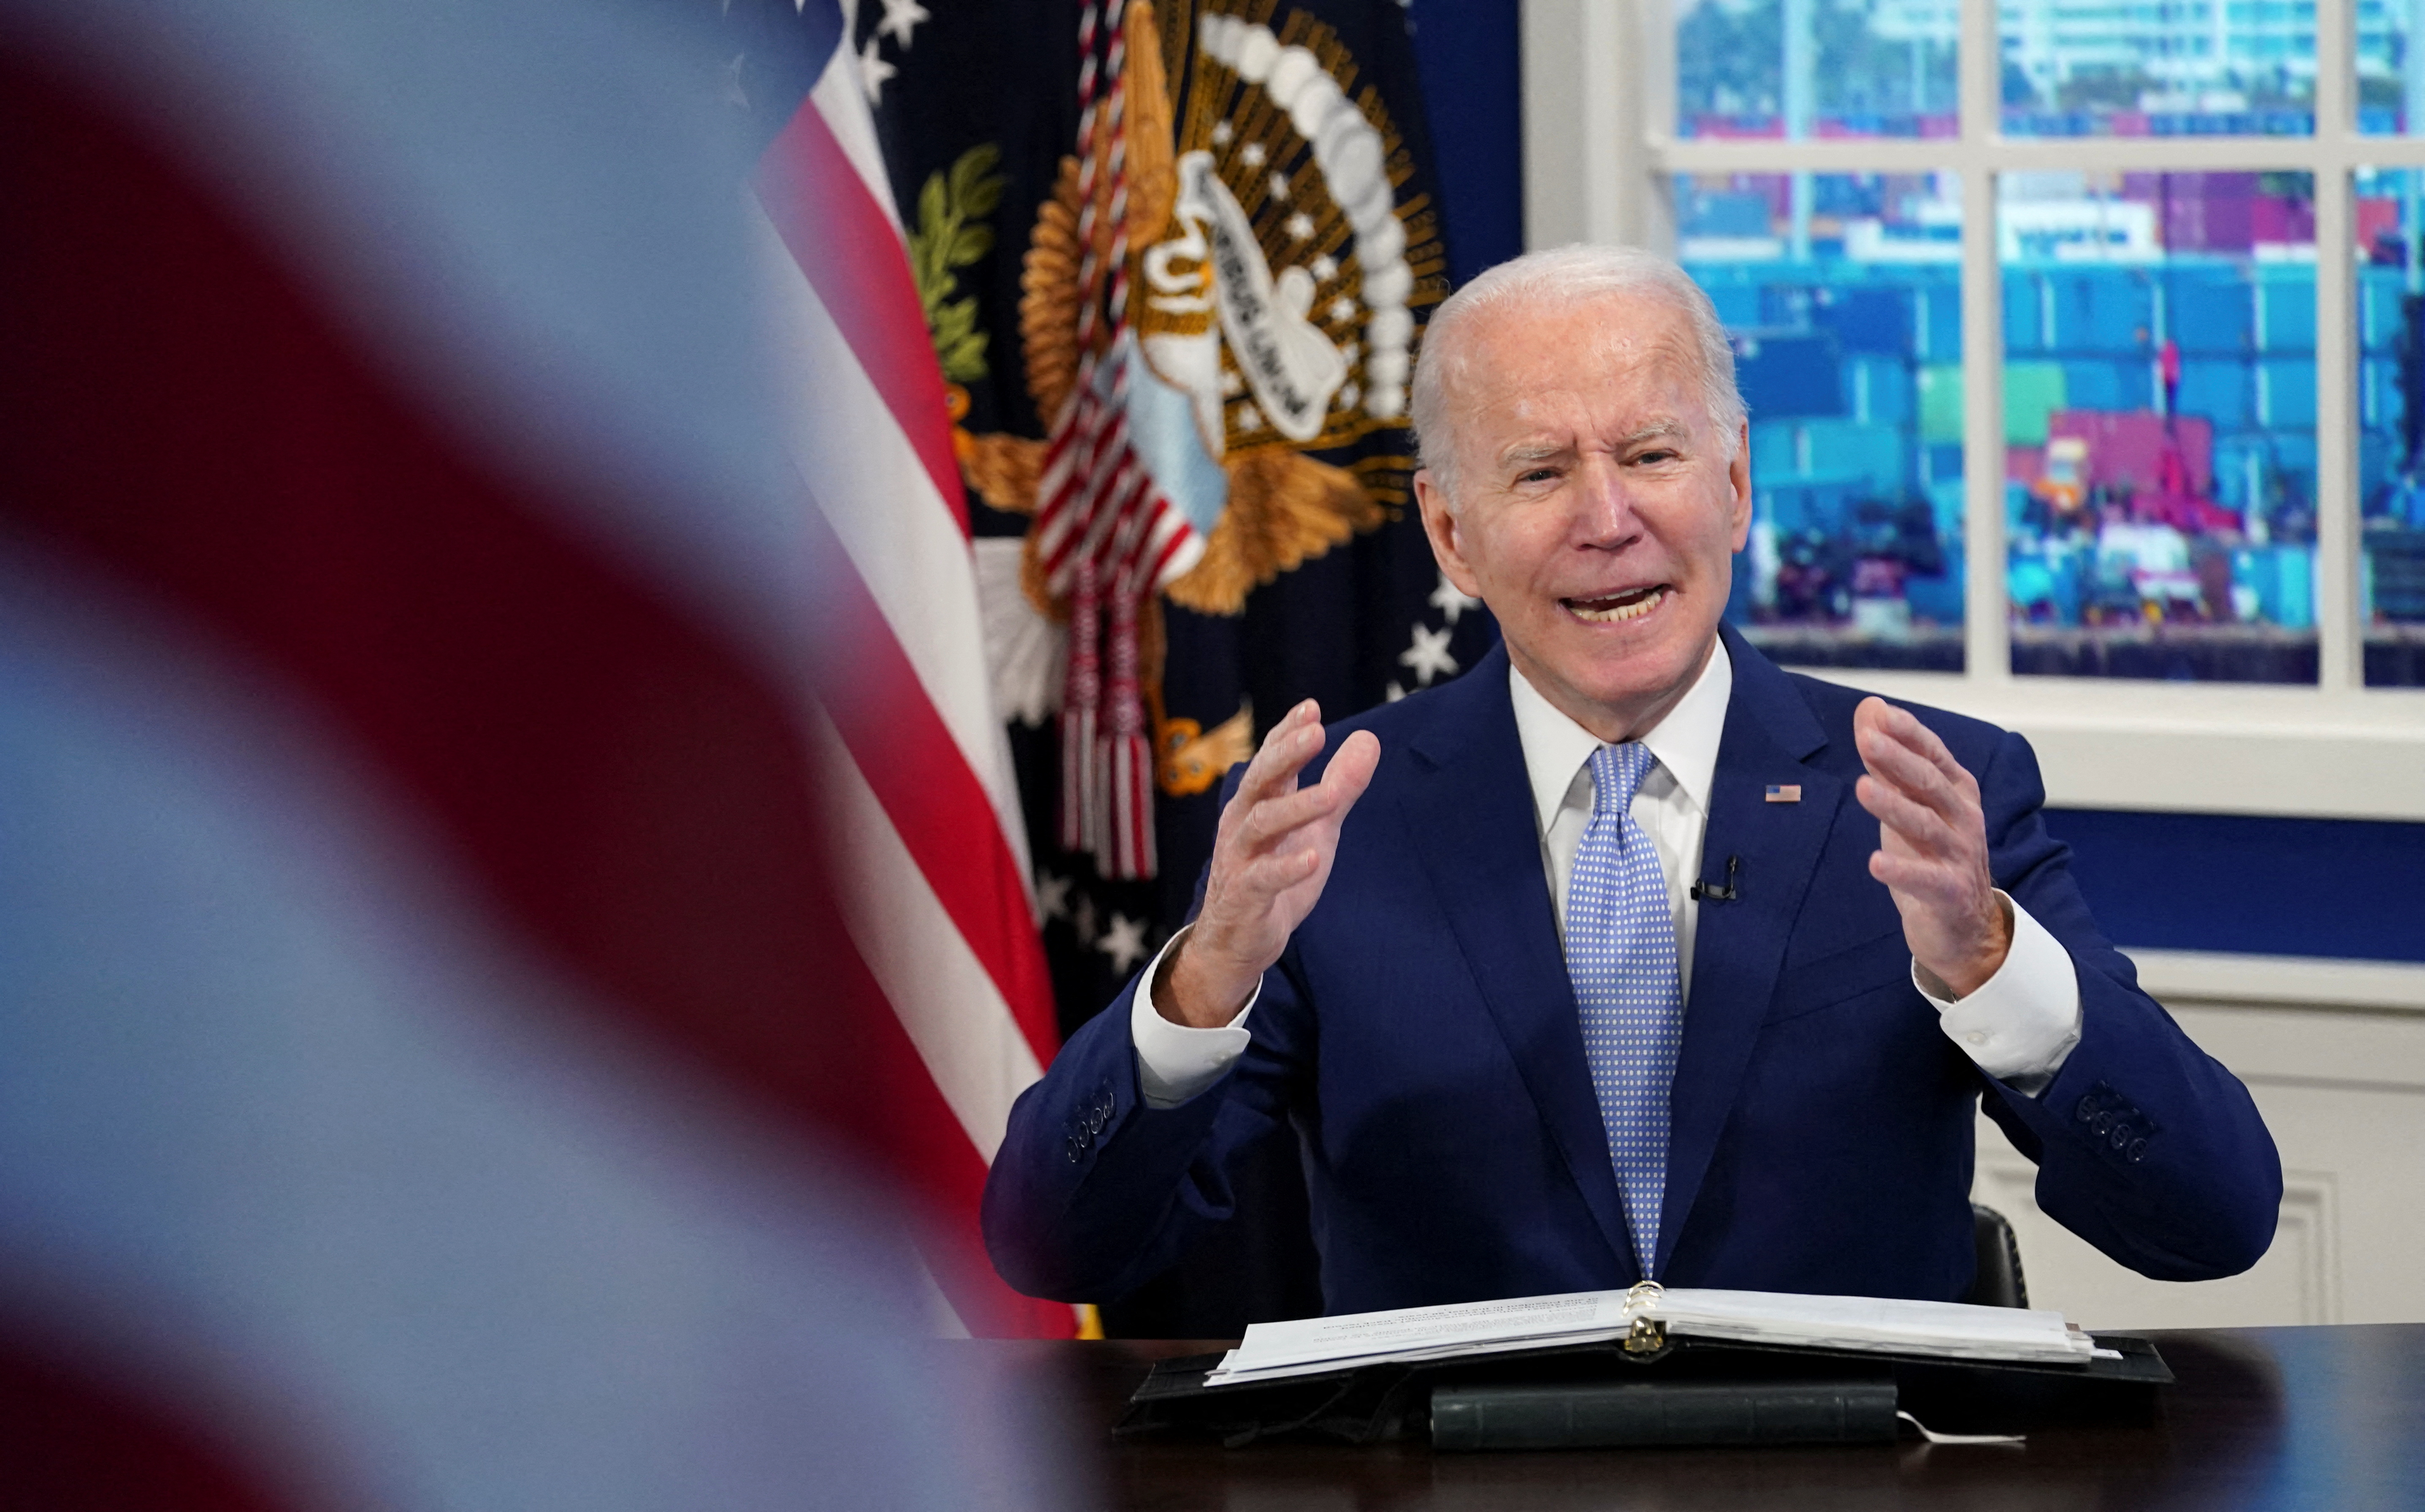 Biden meets with his Supply Chain Disruptions Task Force and private sector CEOs in Washington